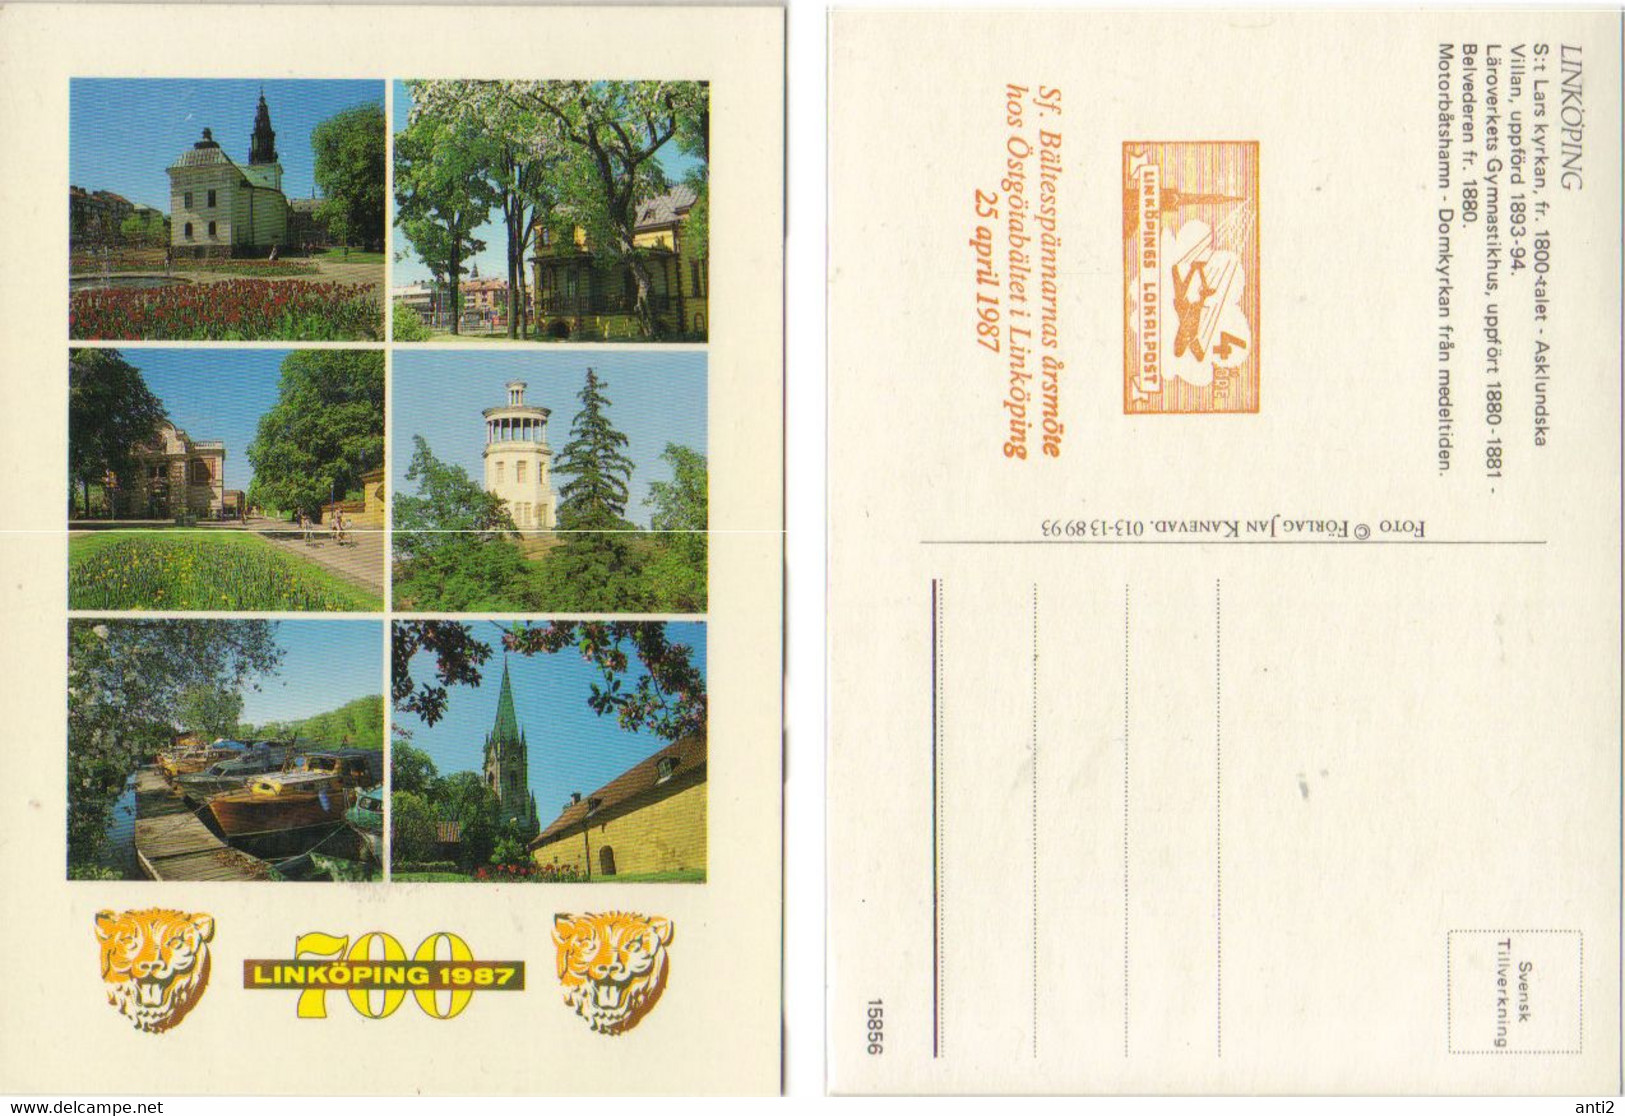 Sweden 1987 Linköping 700 Years, Card For Jubileet, With Imprinted Local Stamp 4 øre - Emissions Locales